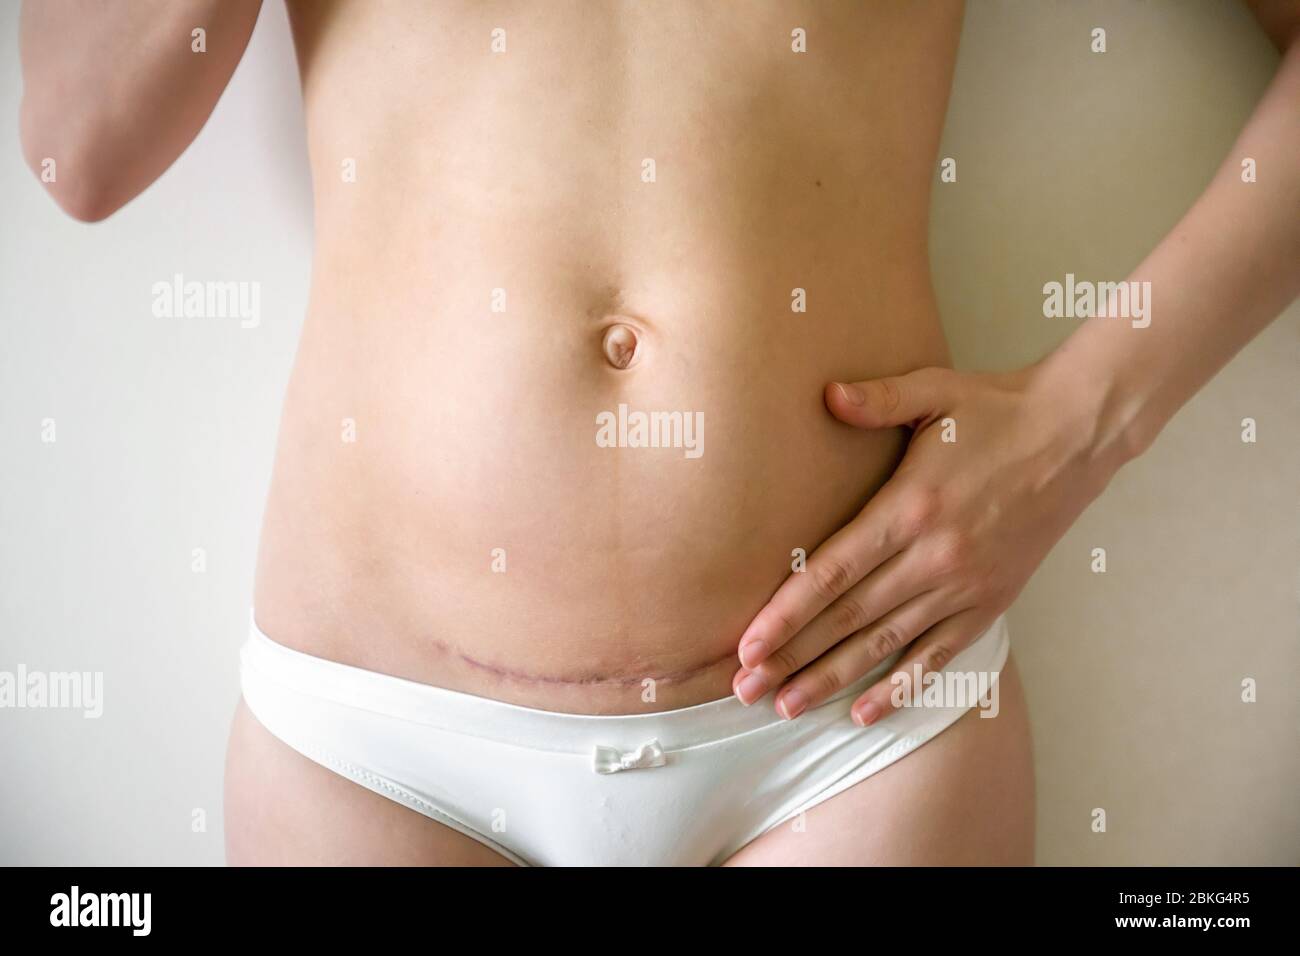 Closeup of woman belly with scar from a cesarean section Stock Photo